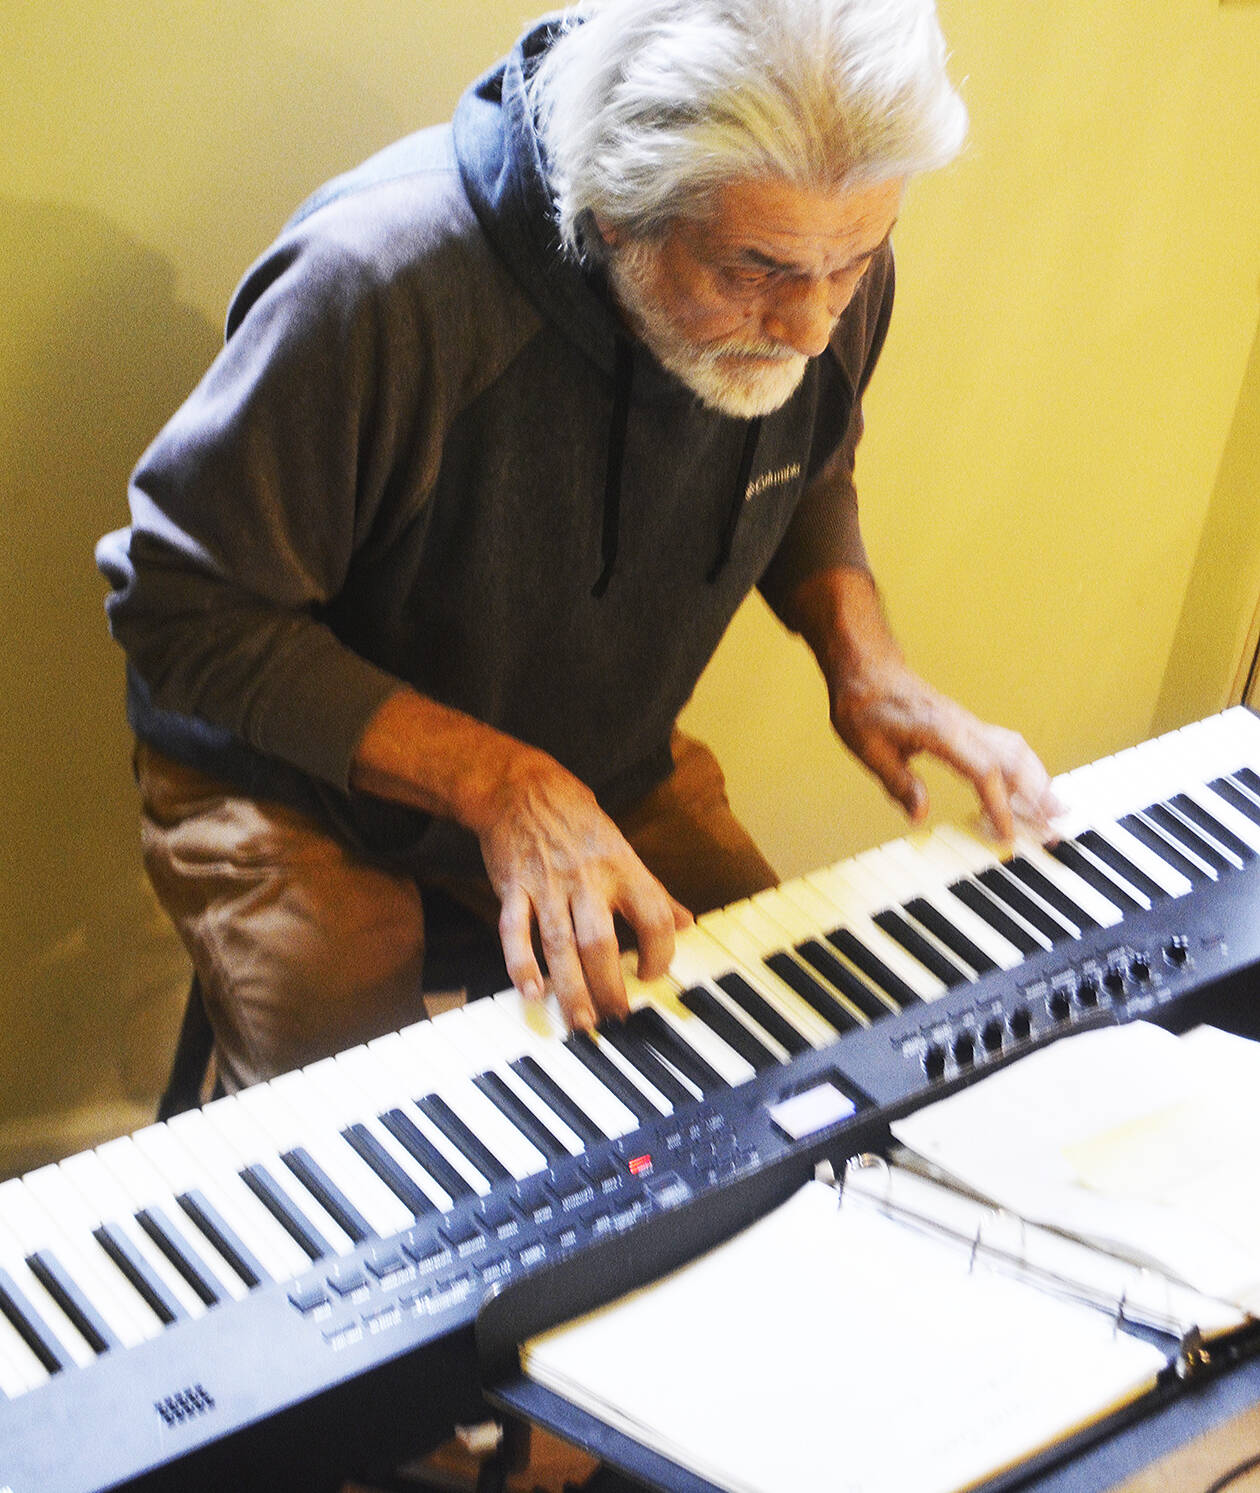 Dean Rowe plays keyboards in the Blue Street band.